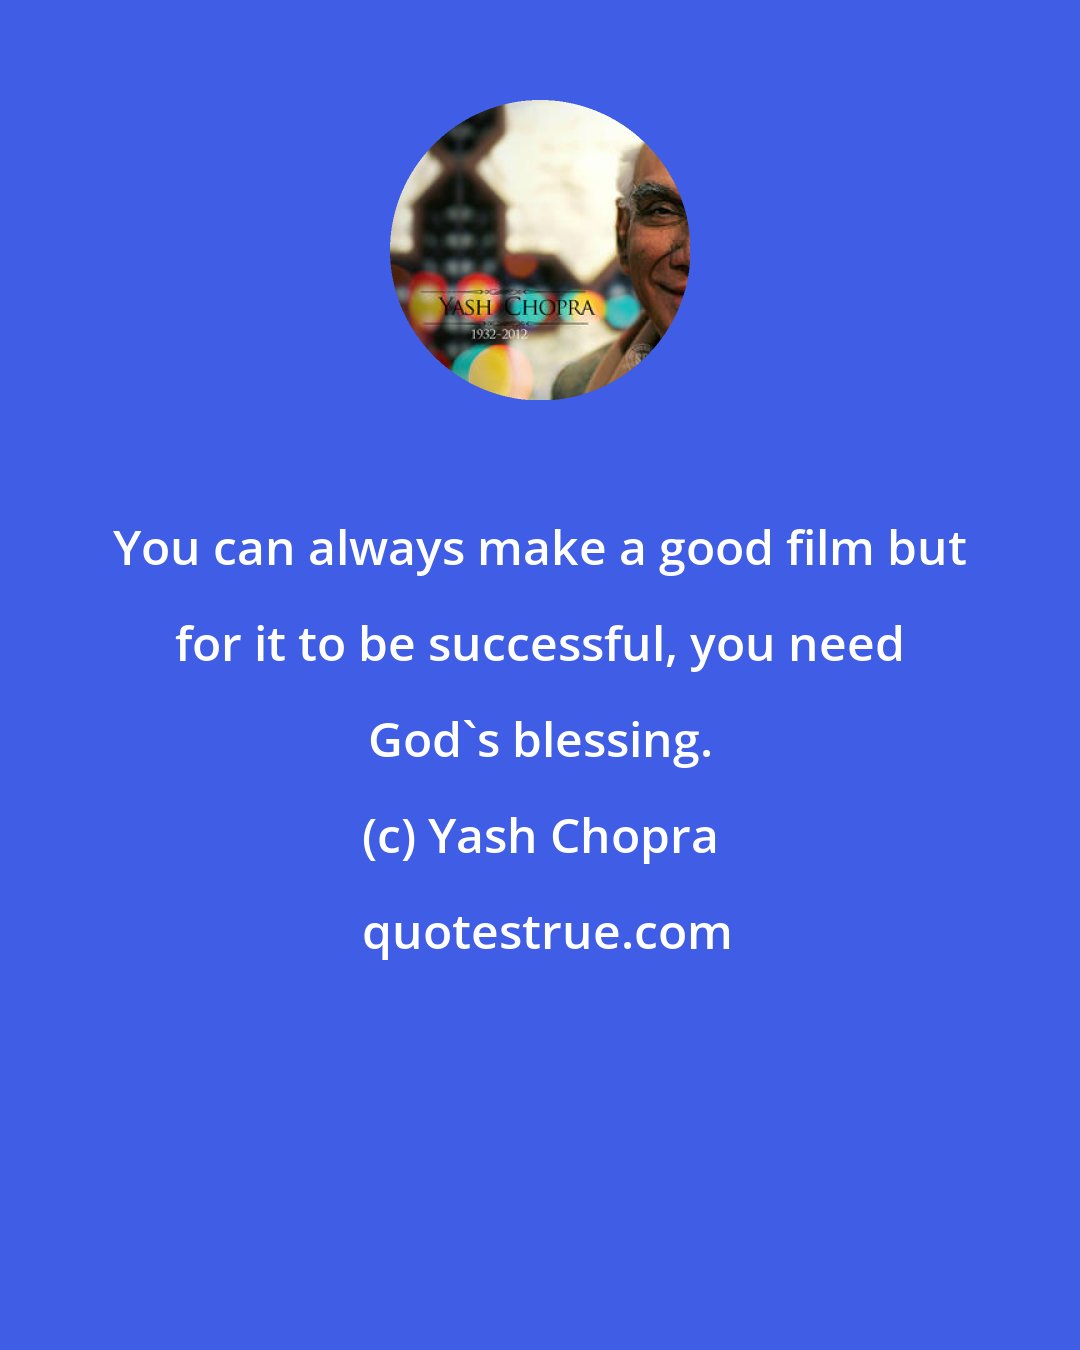 Yash Chopra: You can always make a good film but for it to be successful, you need God's blessing.